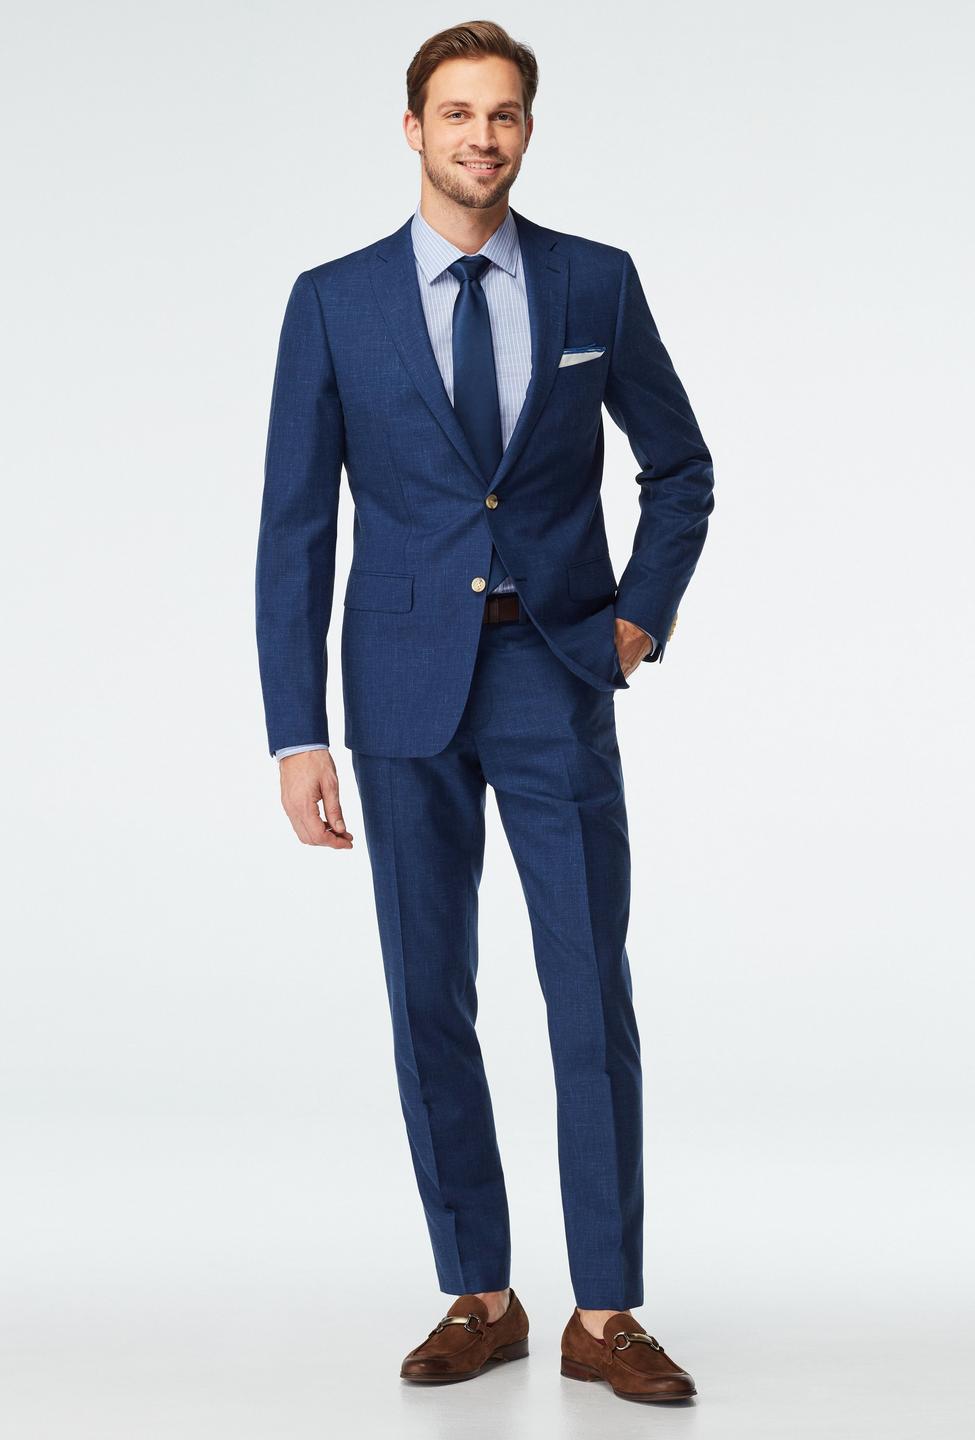 Blue suit - Stockport Solid Design from Seasonal Indochino Collection